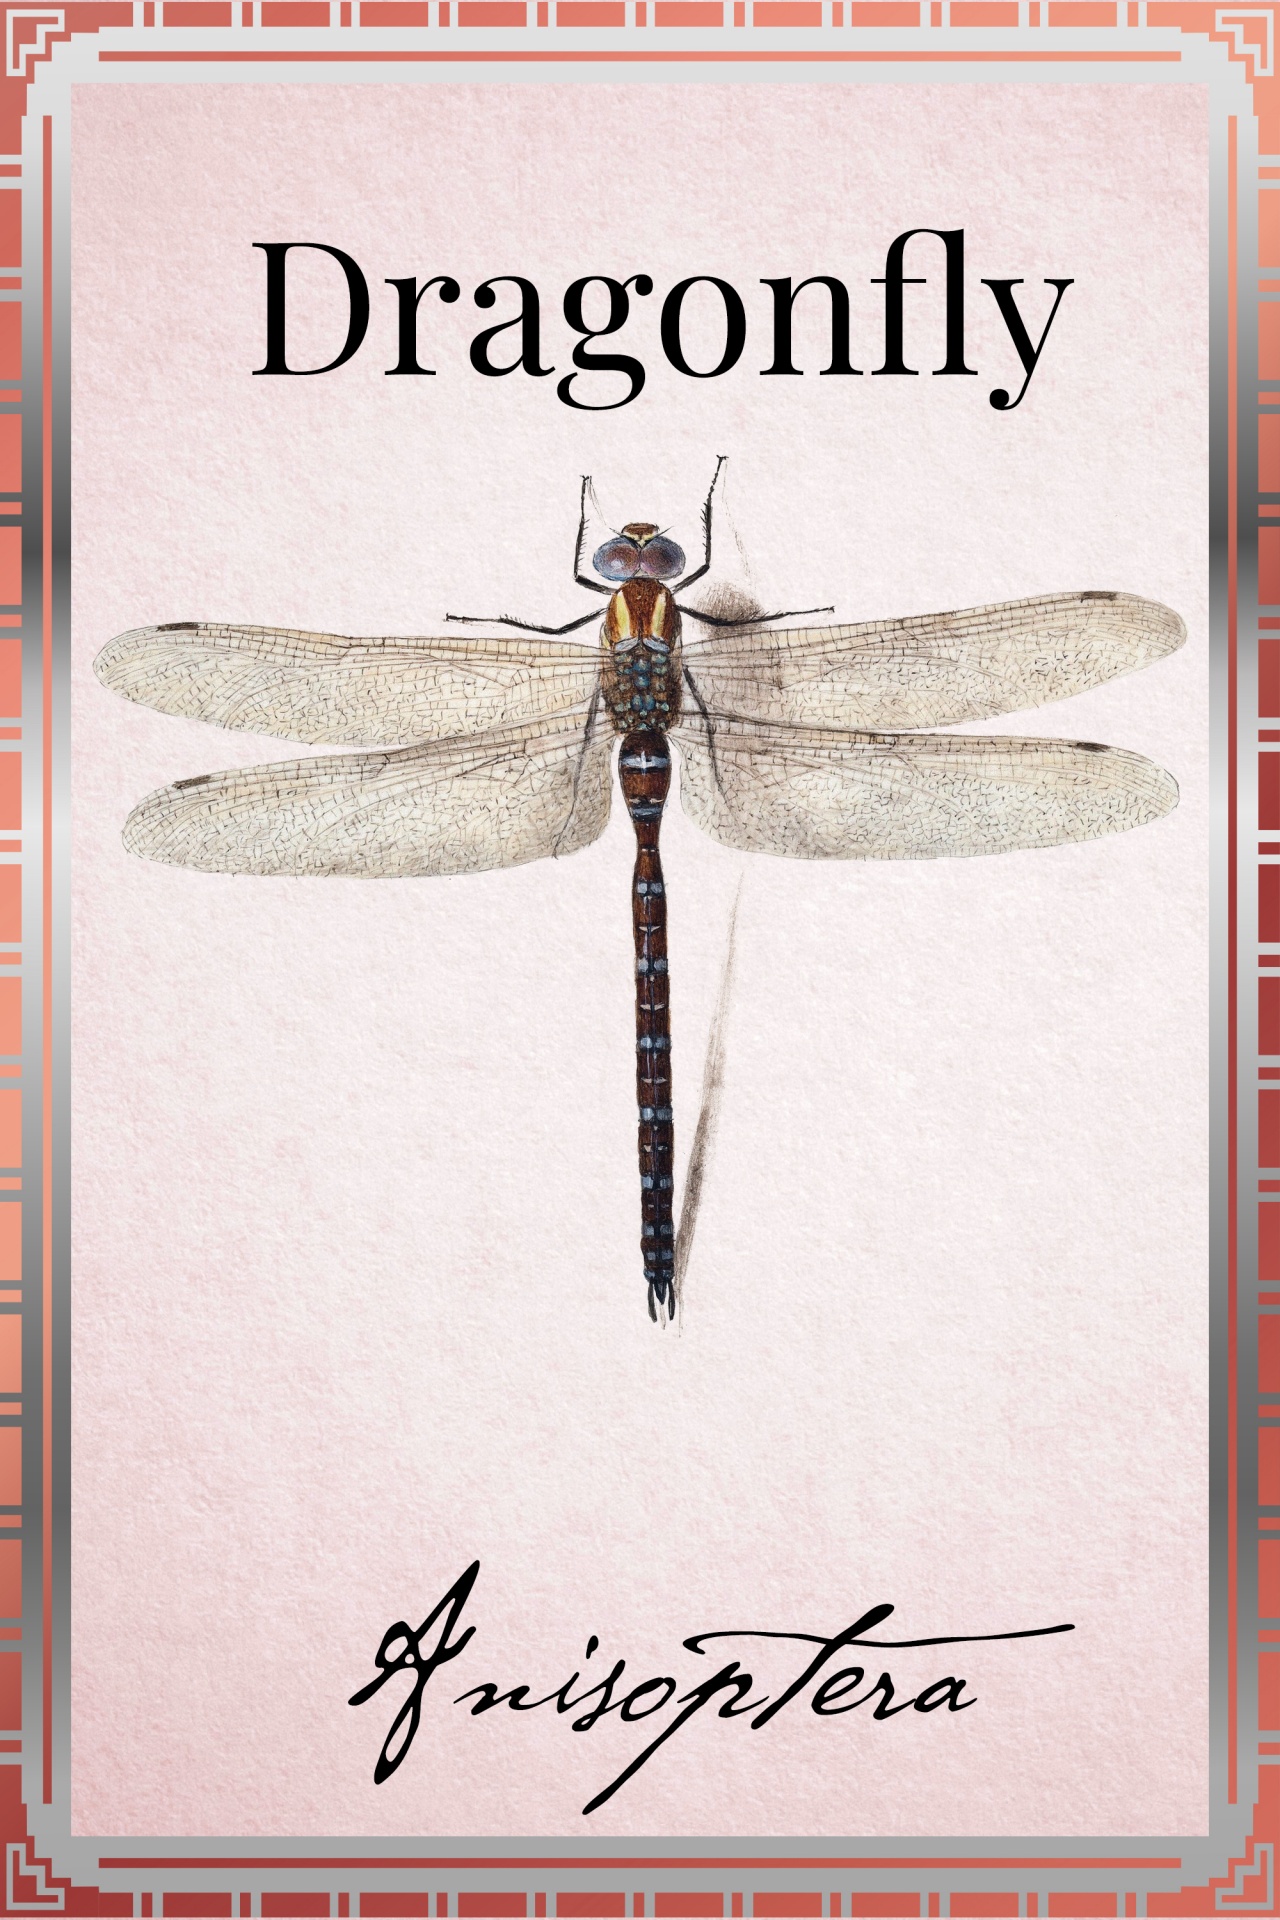 The Dragonfly Vintage Poster